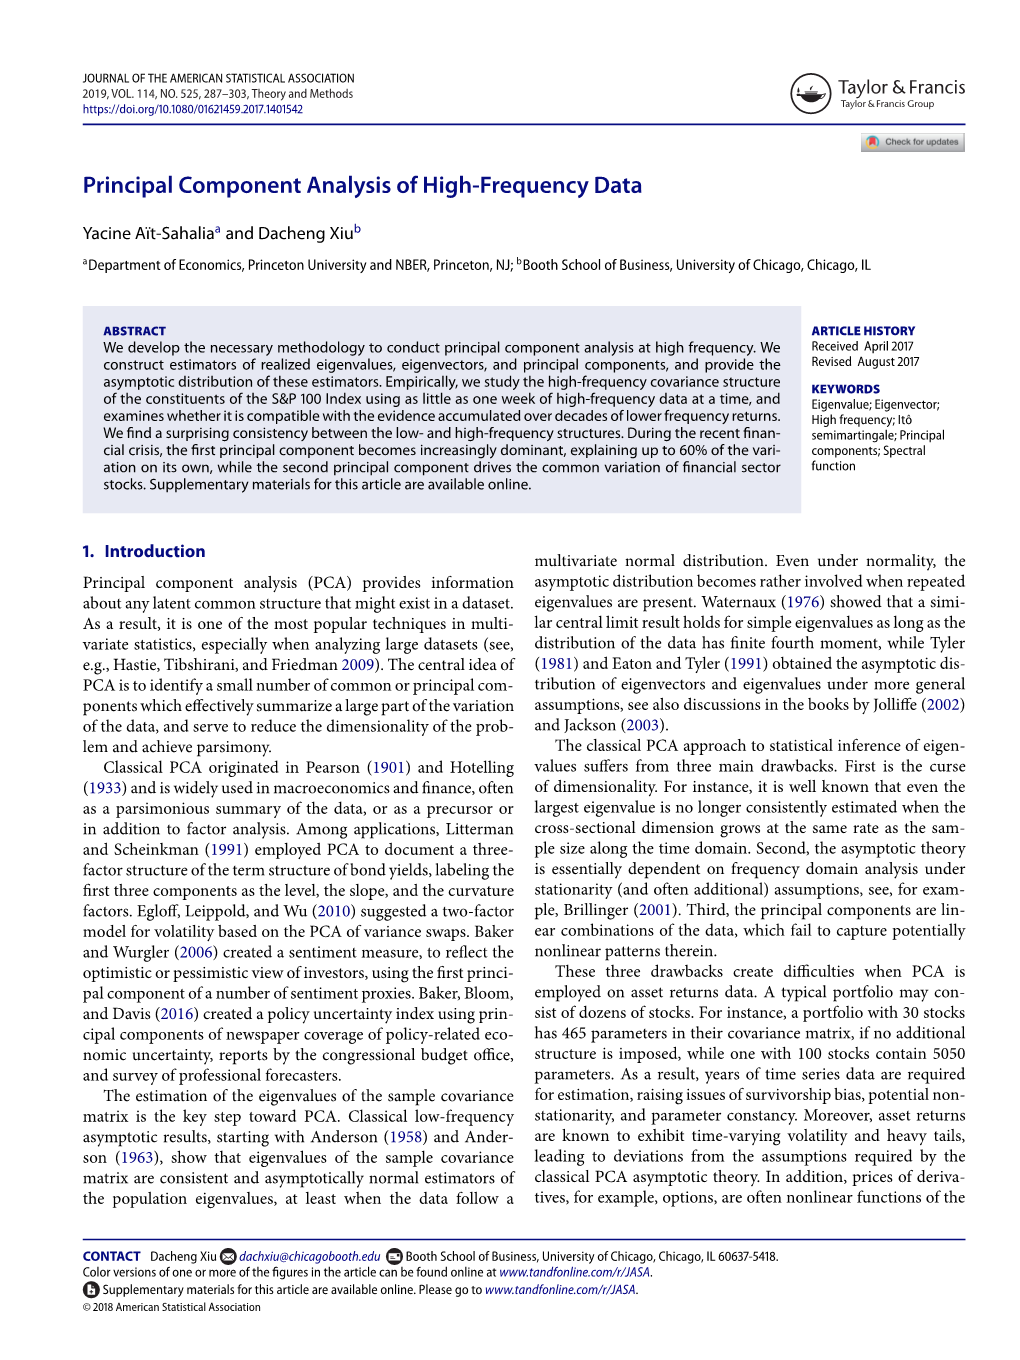 Principal Component Analysis of High-Frequency Data